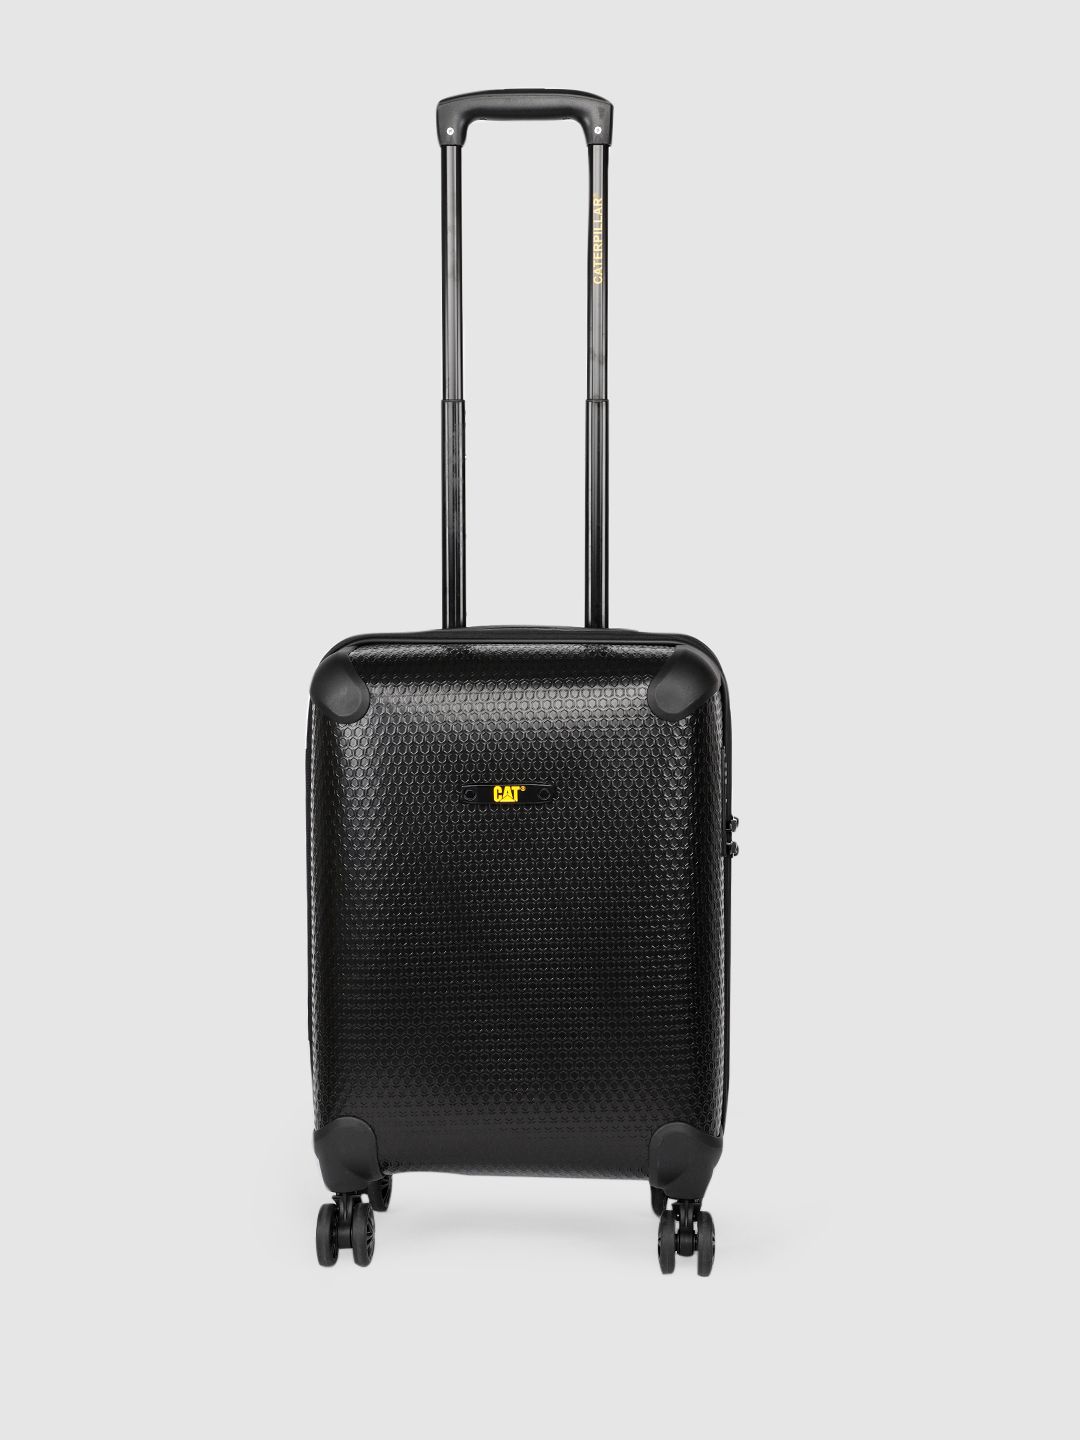 CAT Black Hexagon Hardside Lightweight Cabin Trolley Suitcase Price in India